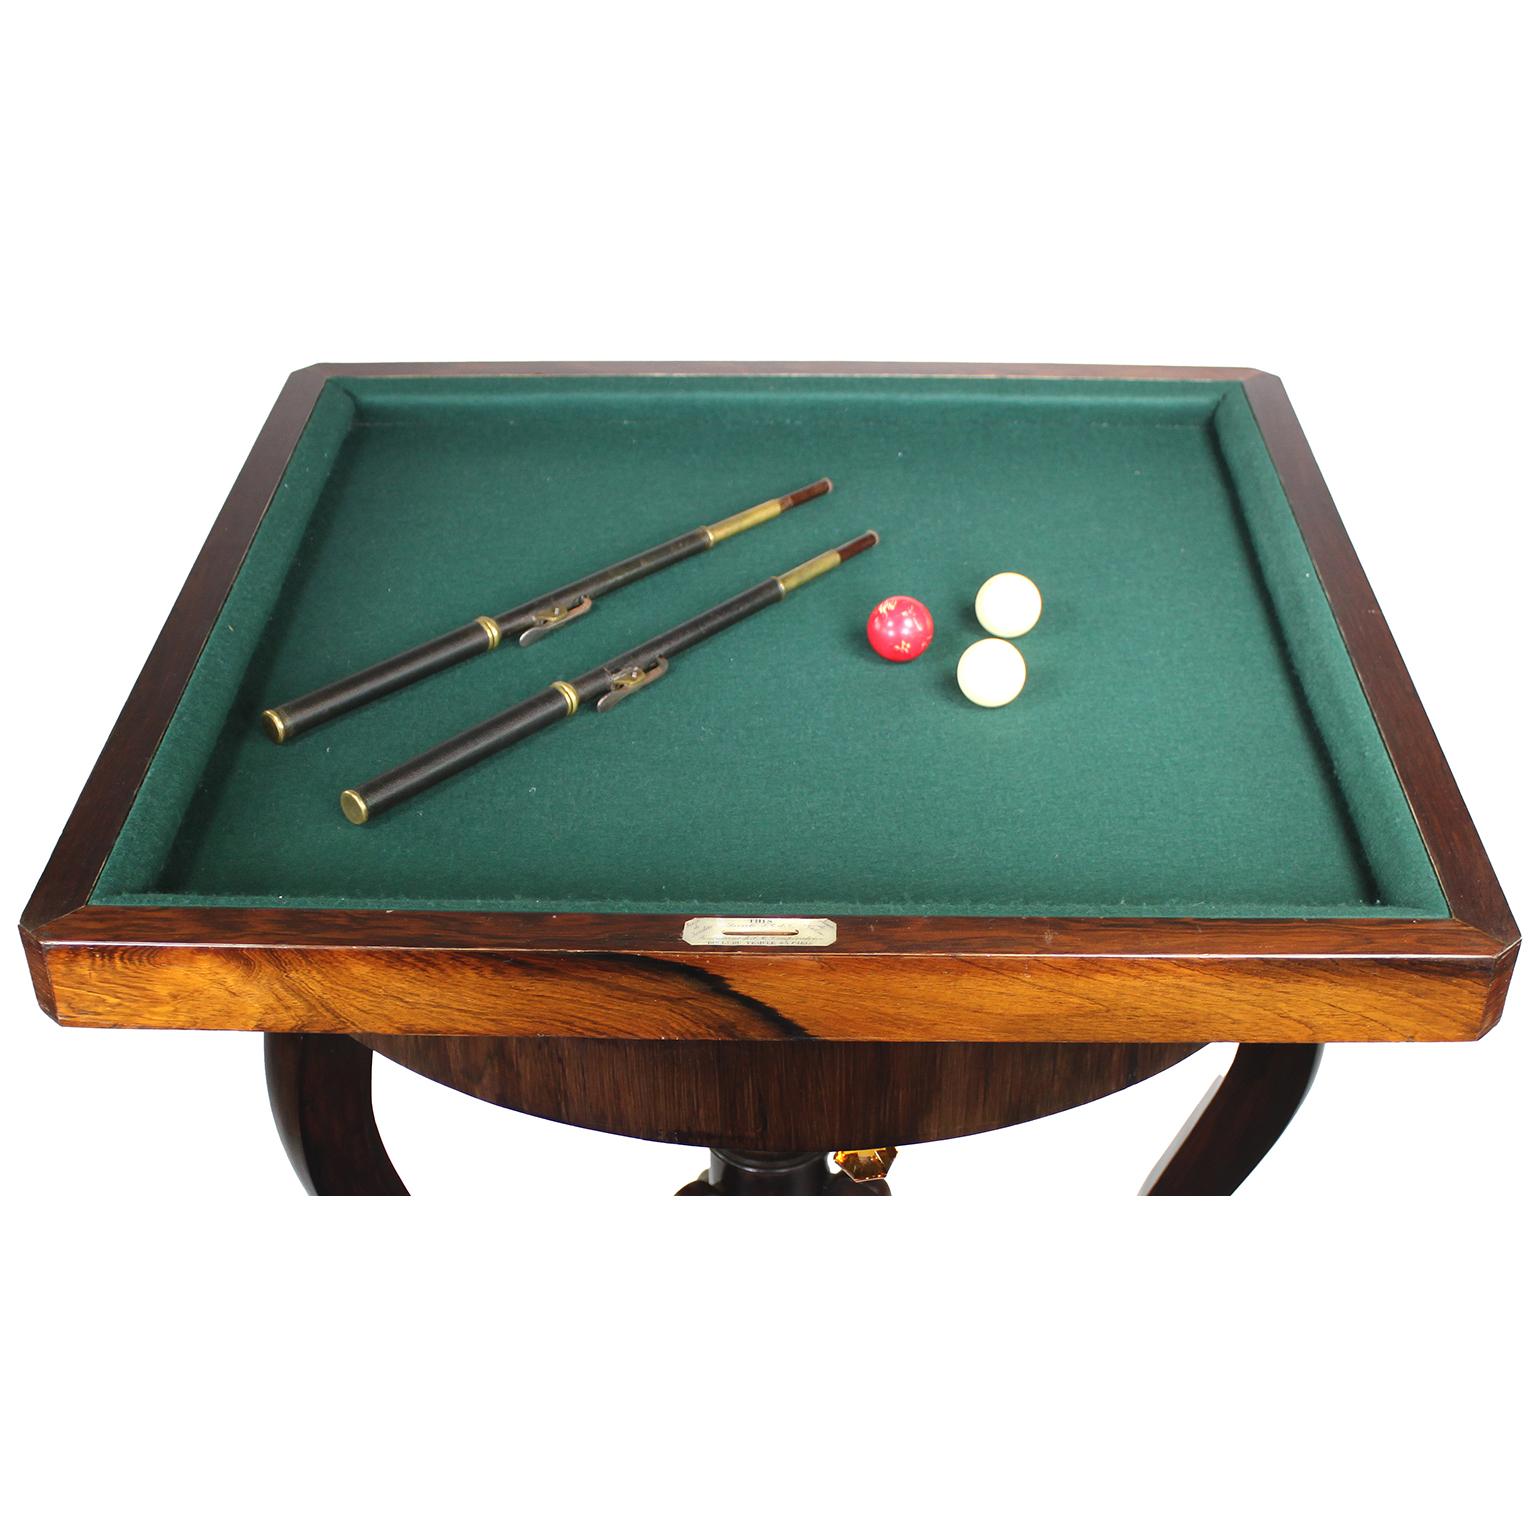 19th Century Rare French Napoleon III Carom Billiard-Checkers-Draughts Card Game Table 'THIS' For Sale